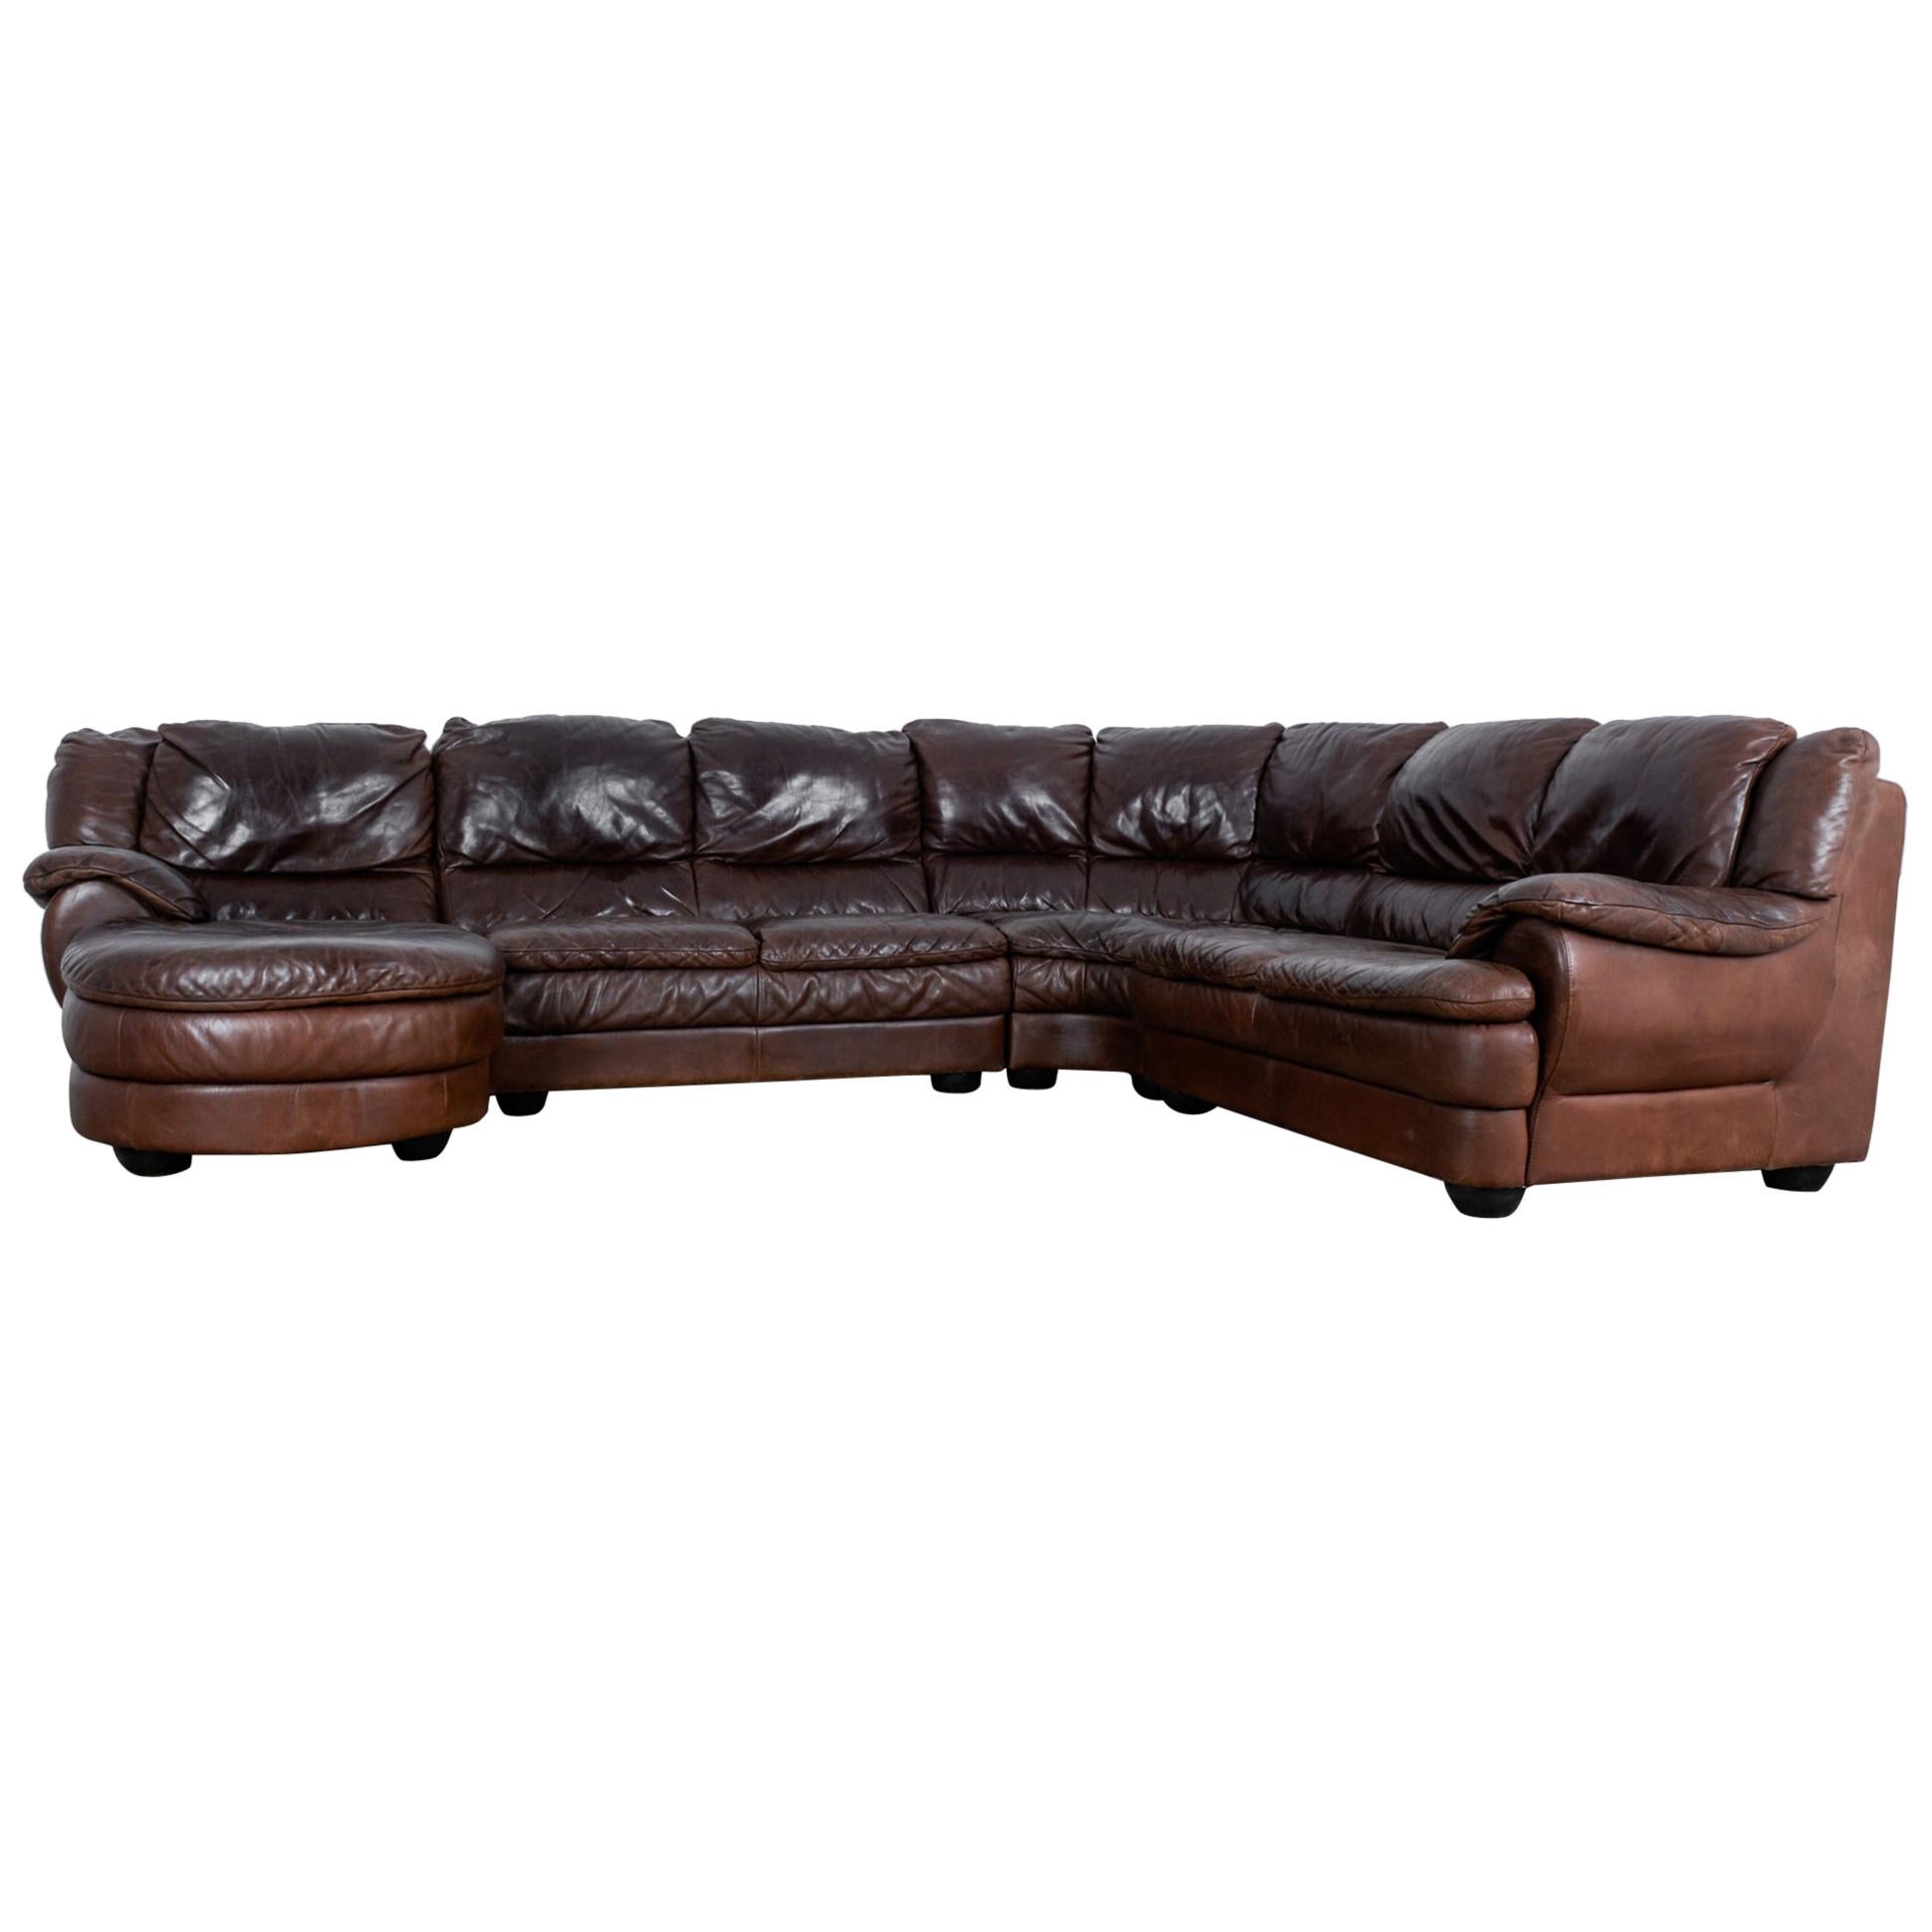 Vintage Belgian Four-Piece Leather Sectional Sofa